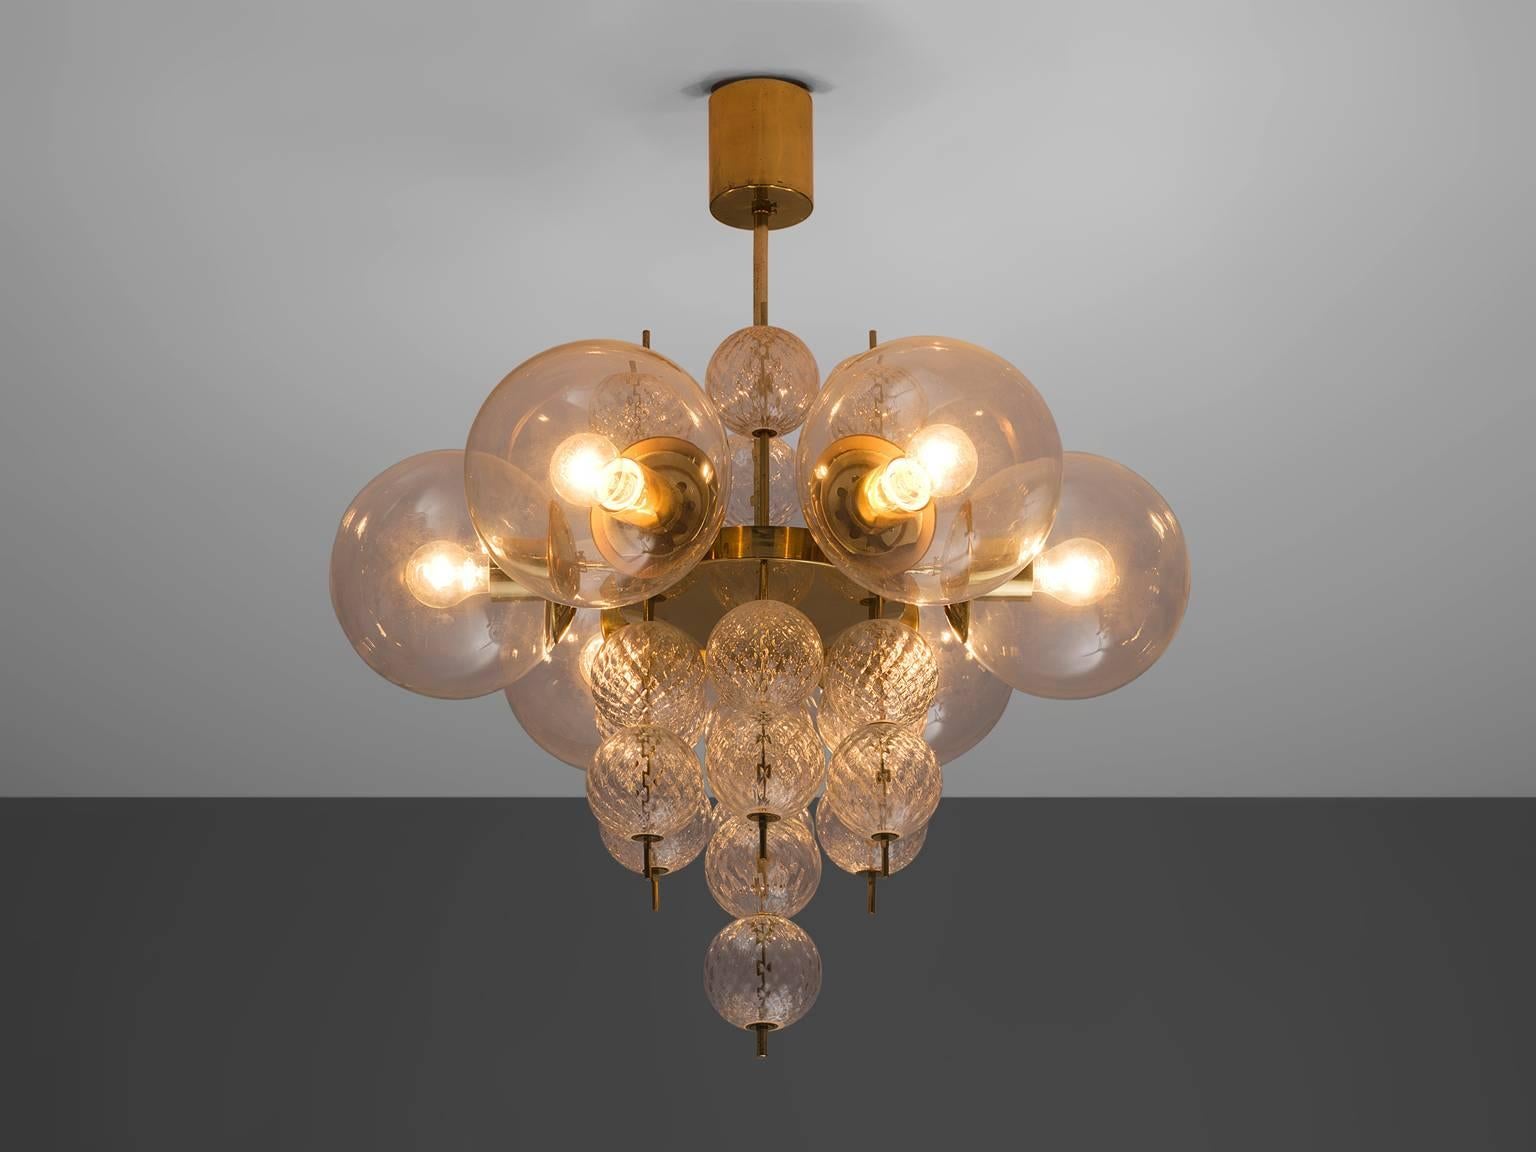 Set of three brass chandeliers, brass and glass bulbs, Austria, 1960s.

Set of 3 chandeliers with brass fixture and art-glass. The chandelier with brass frame consist of six lights, formed in a circle, with glass shades. The pleasant light it